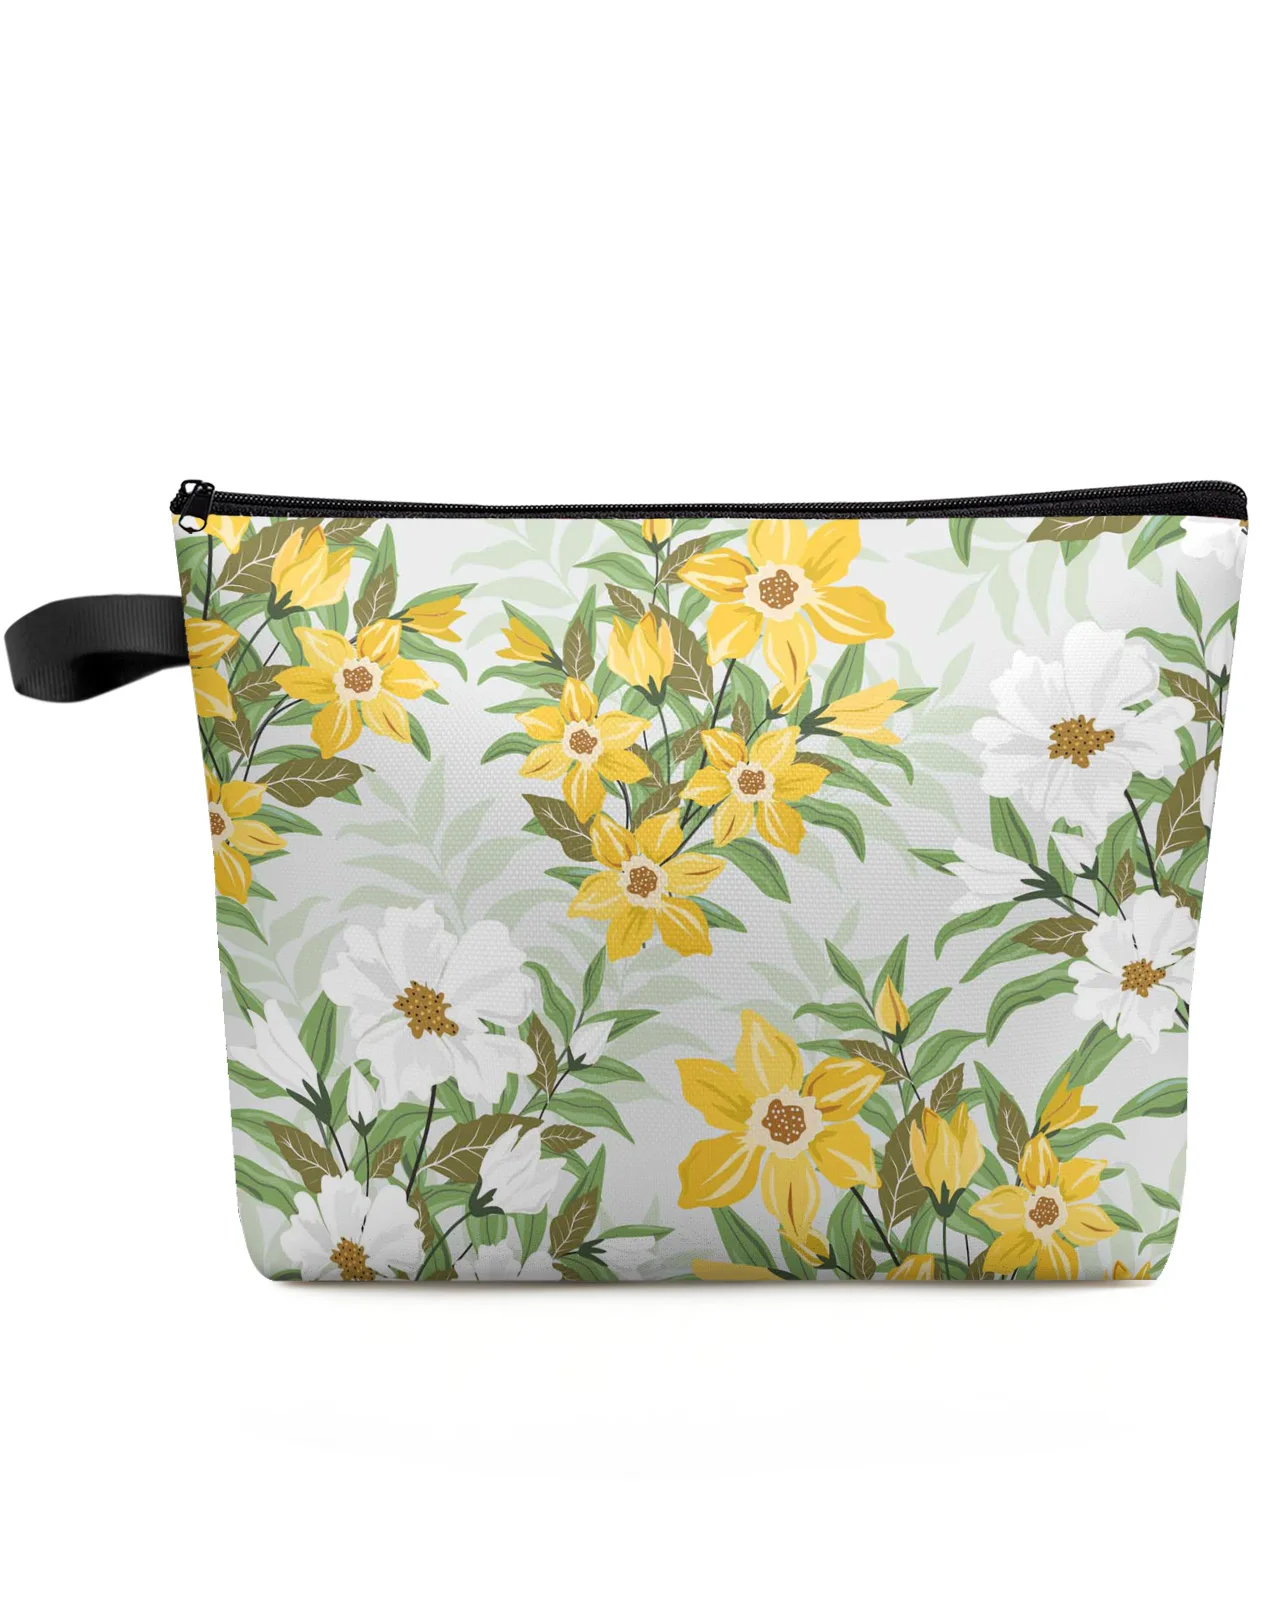 

Tropical Plants Flowers Large Cosmetic Bag For Women Make Up Pouch Portable Washbag Toiletries Organizer Storage Hangbag